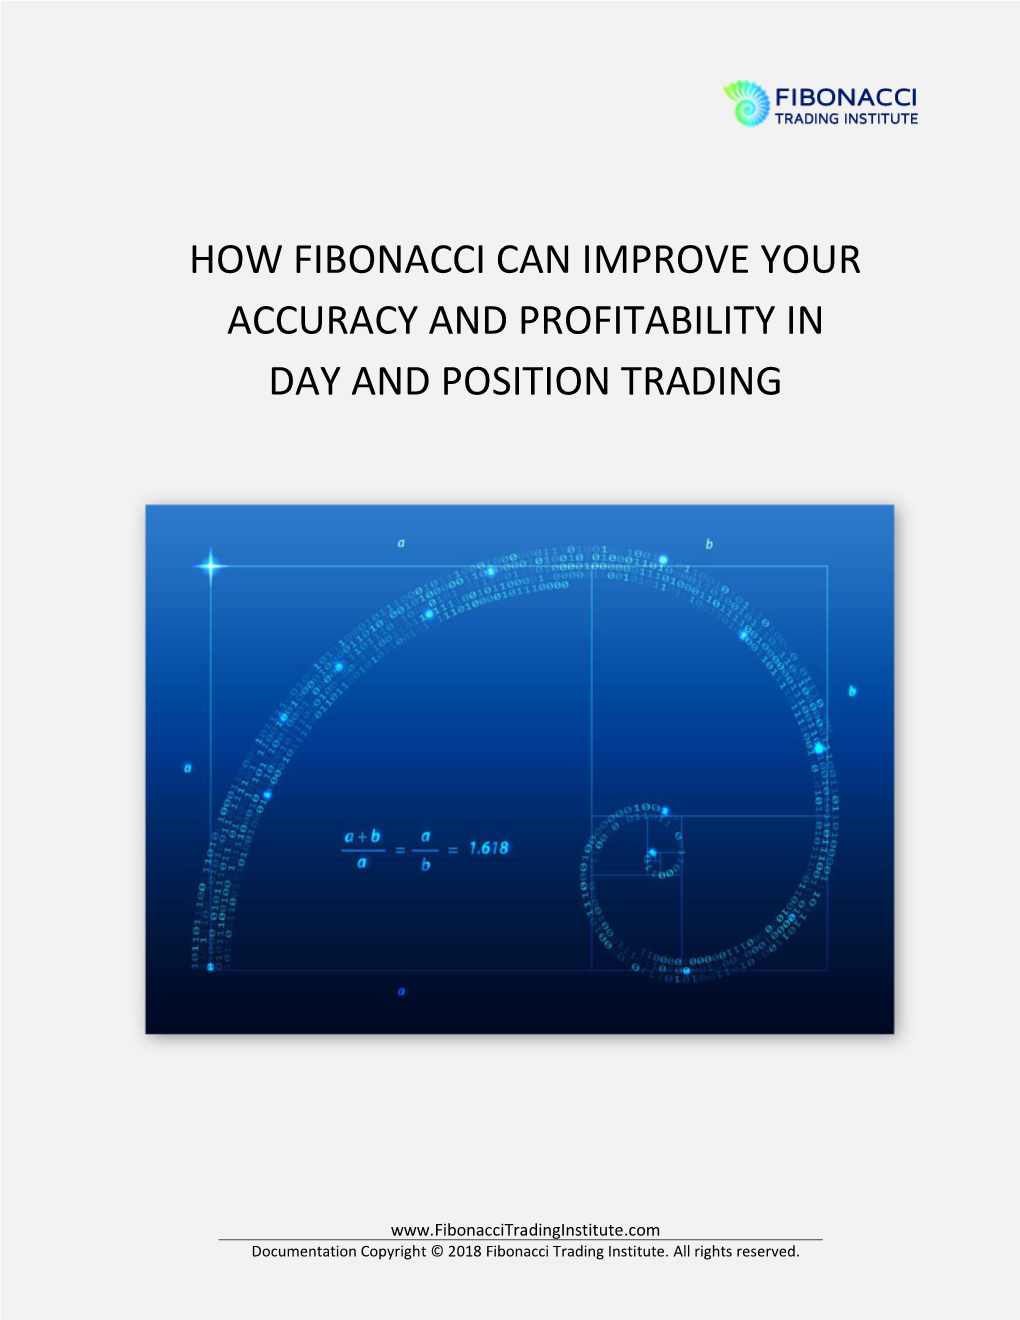 How Fibonacci Can Improve Your Accuracy and Profitability in Day and Position Trading